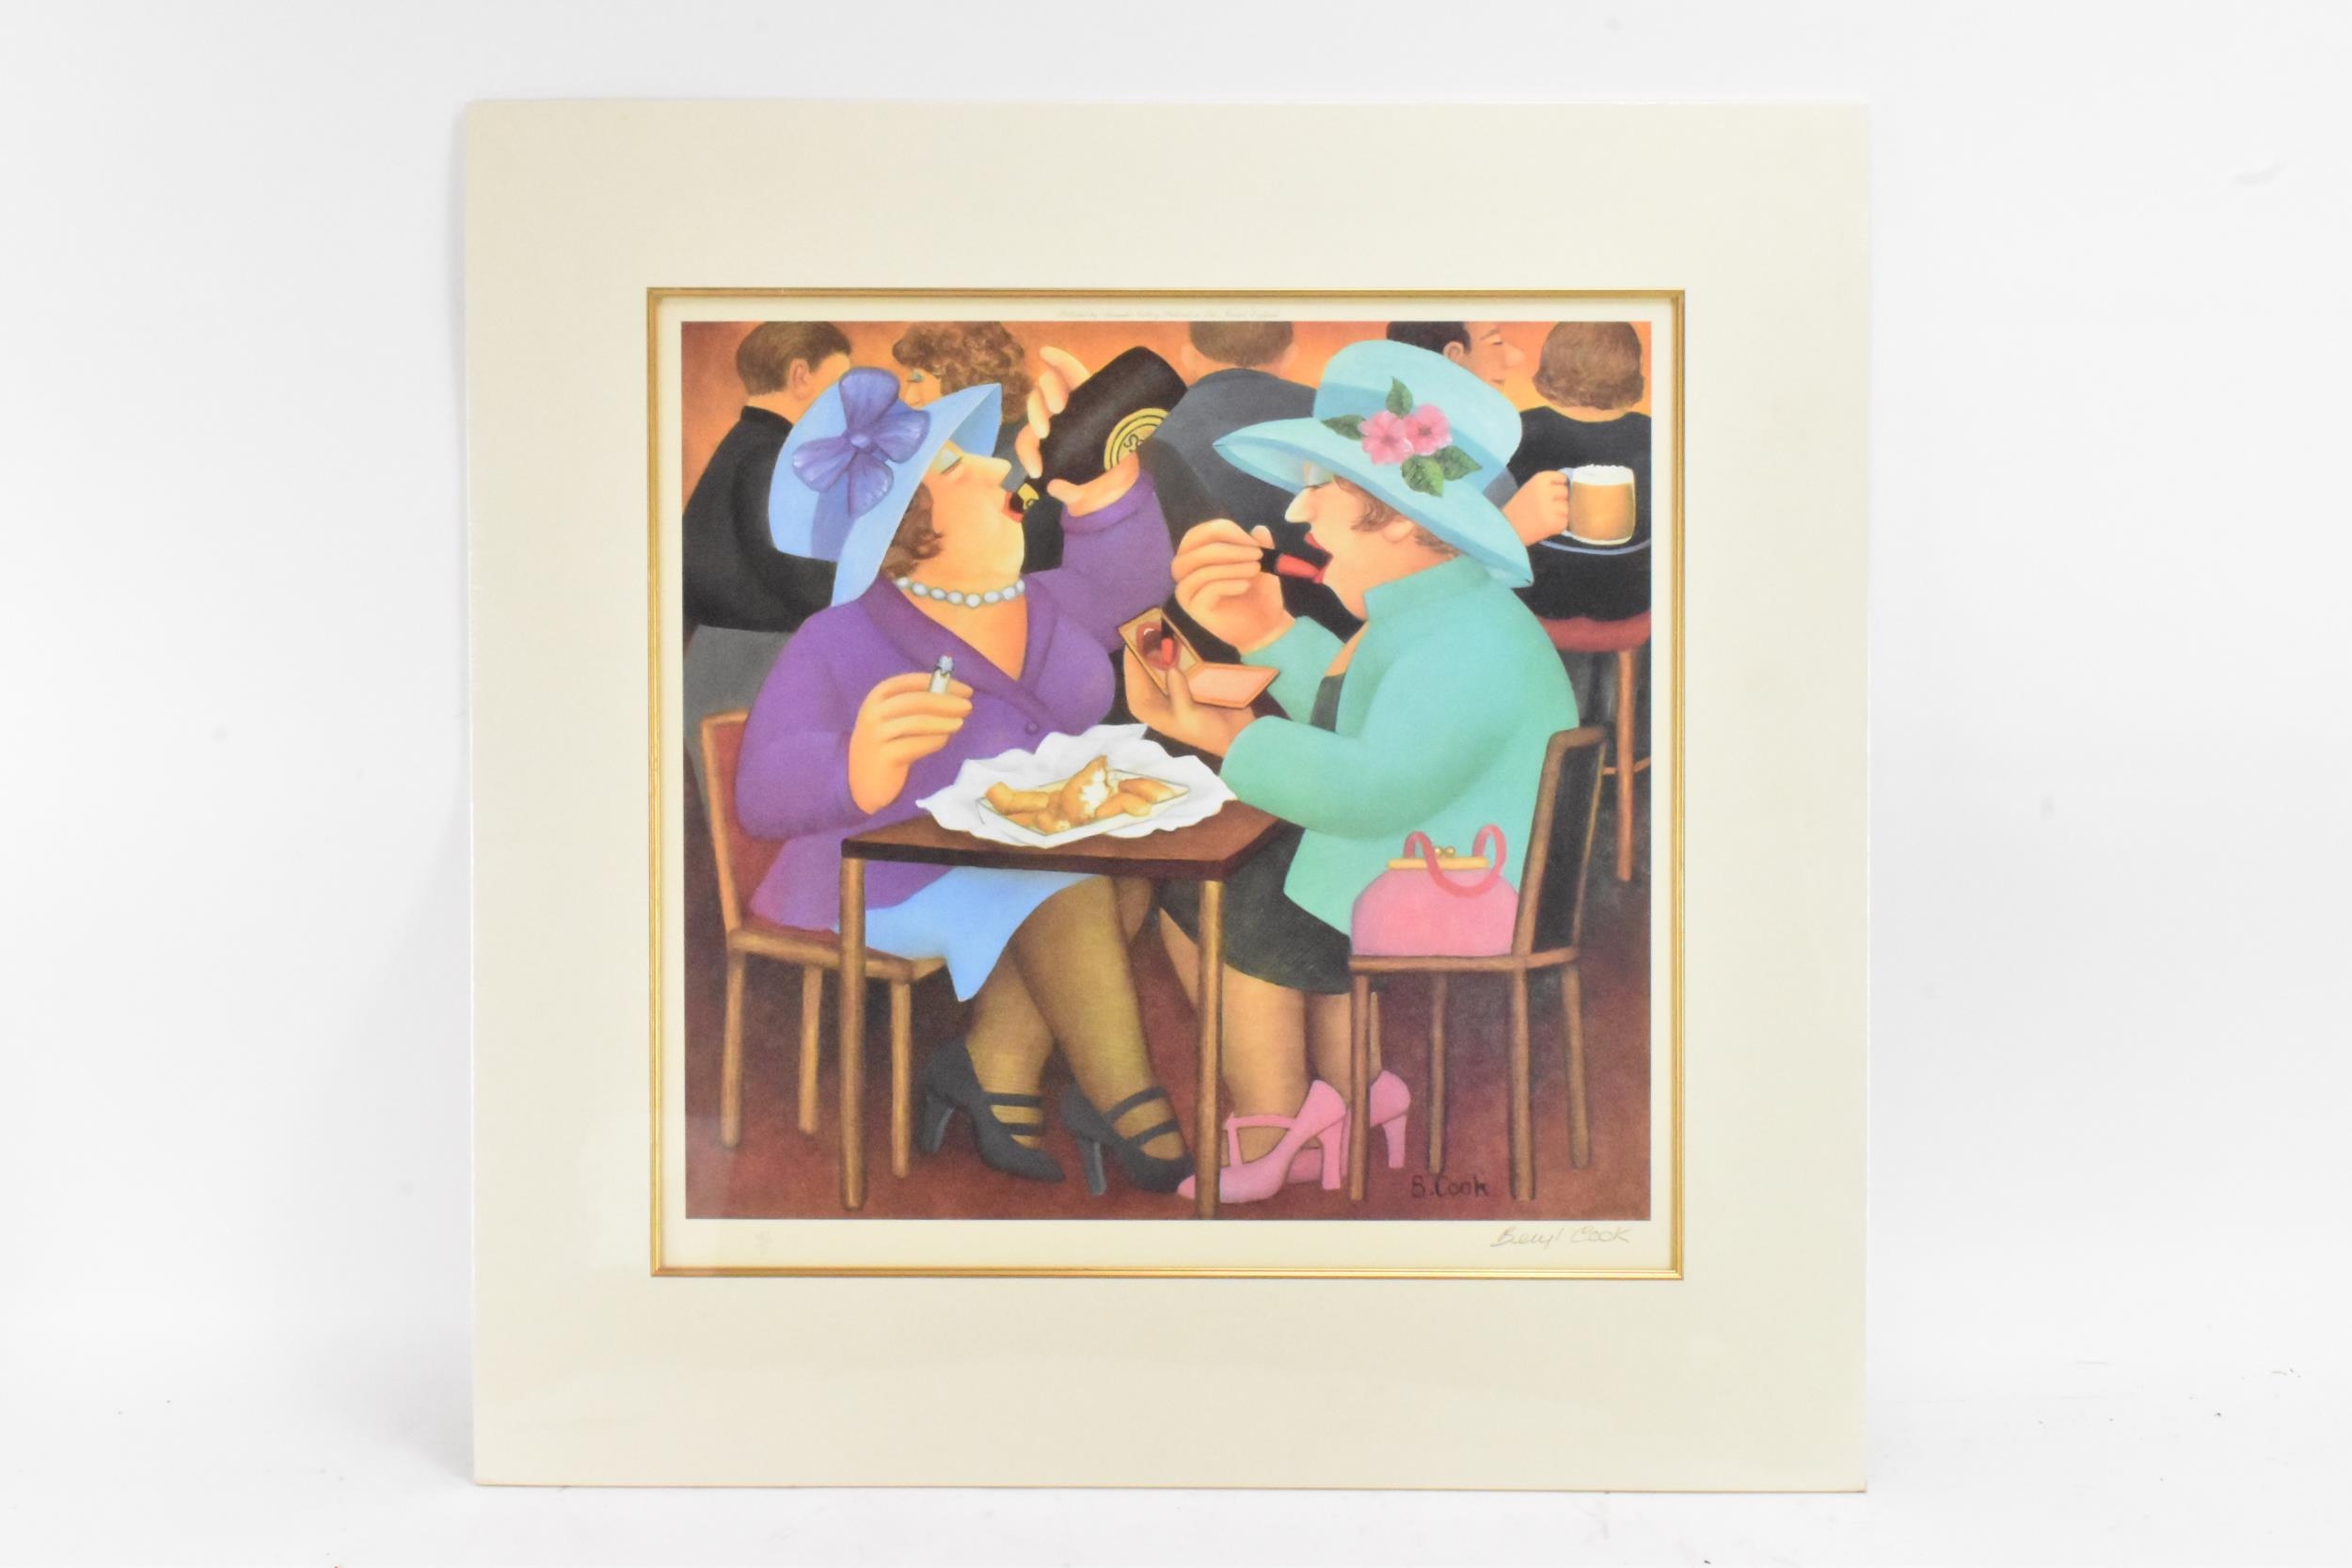 Beryl Cook (1926-2008) 'Ladies Who Lunch' signed limited edition print, published 2004, numbered